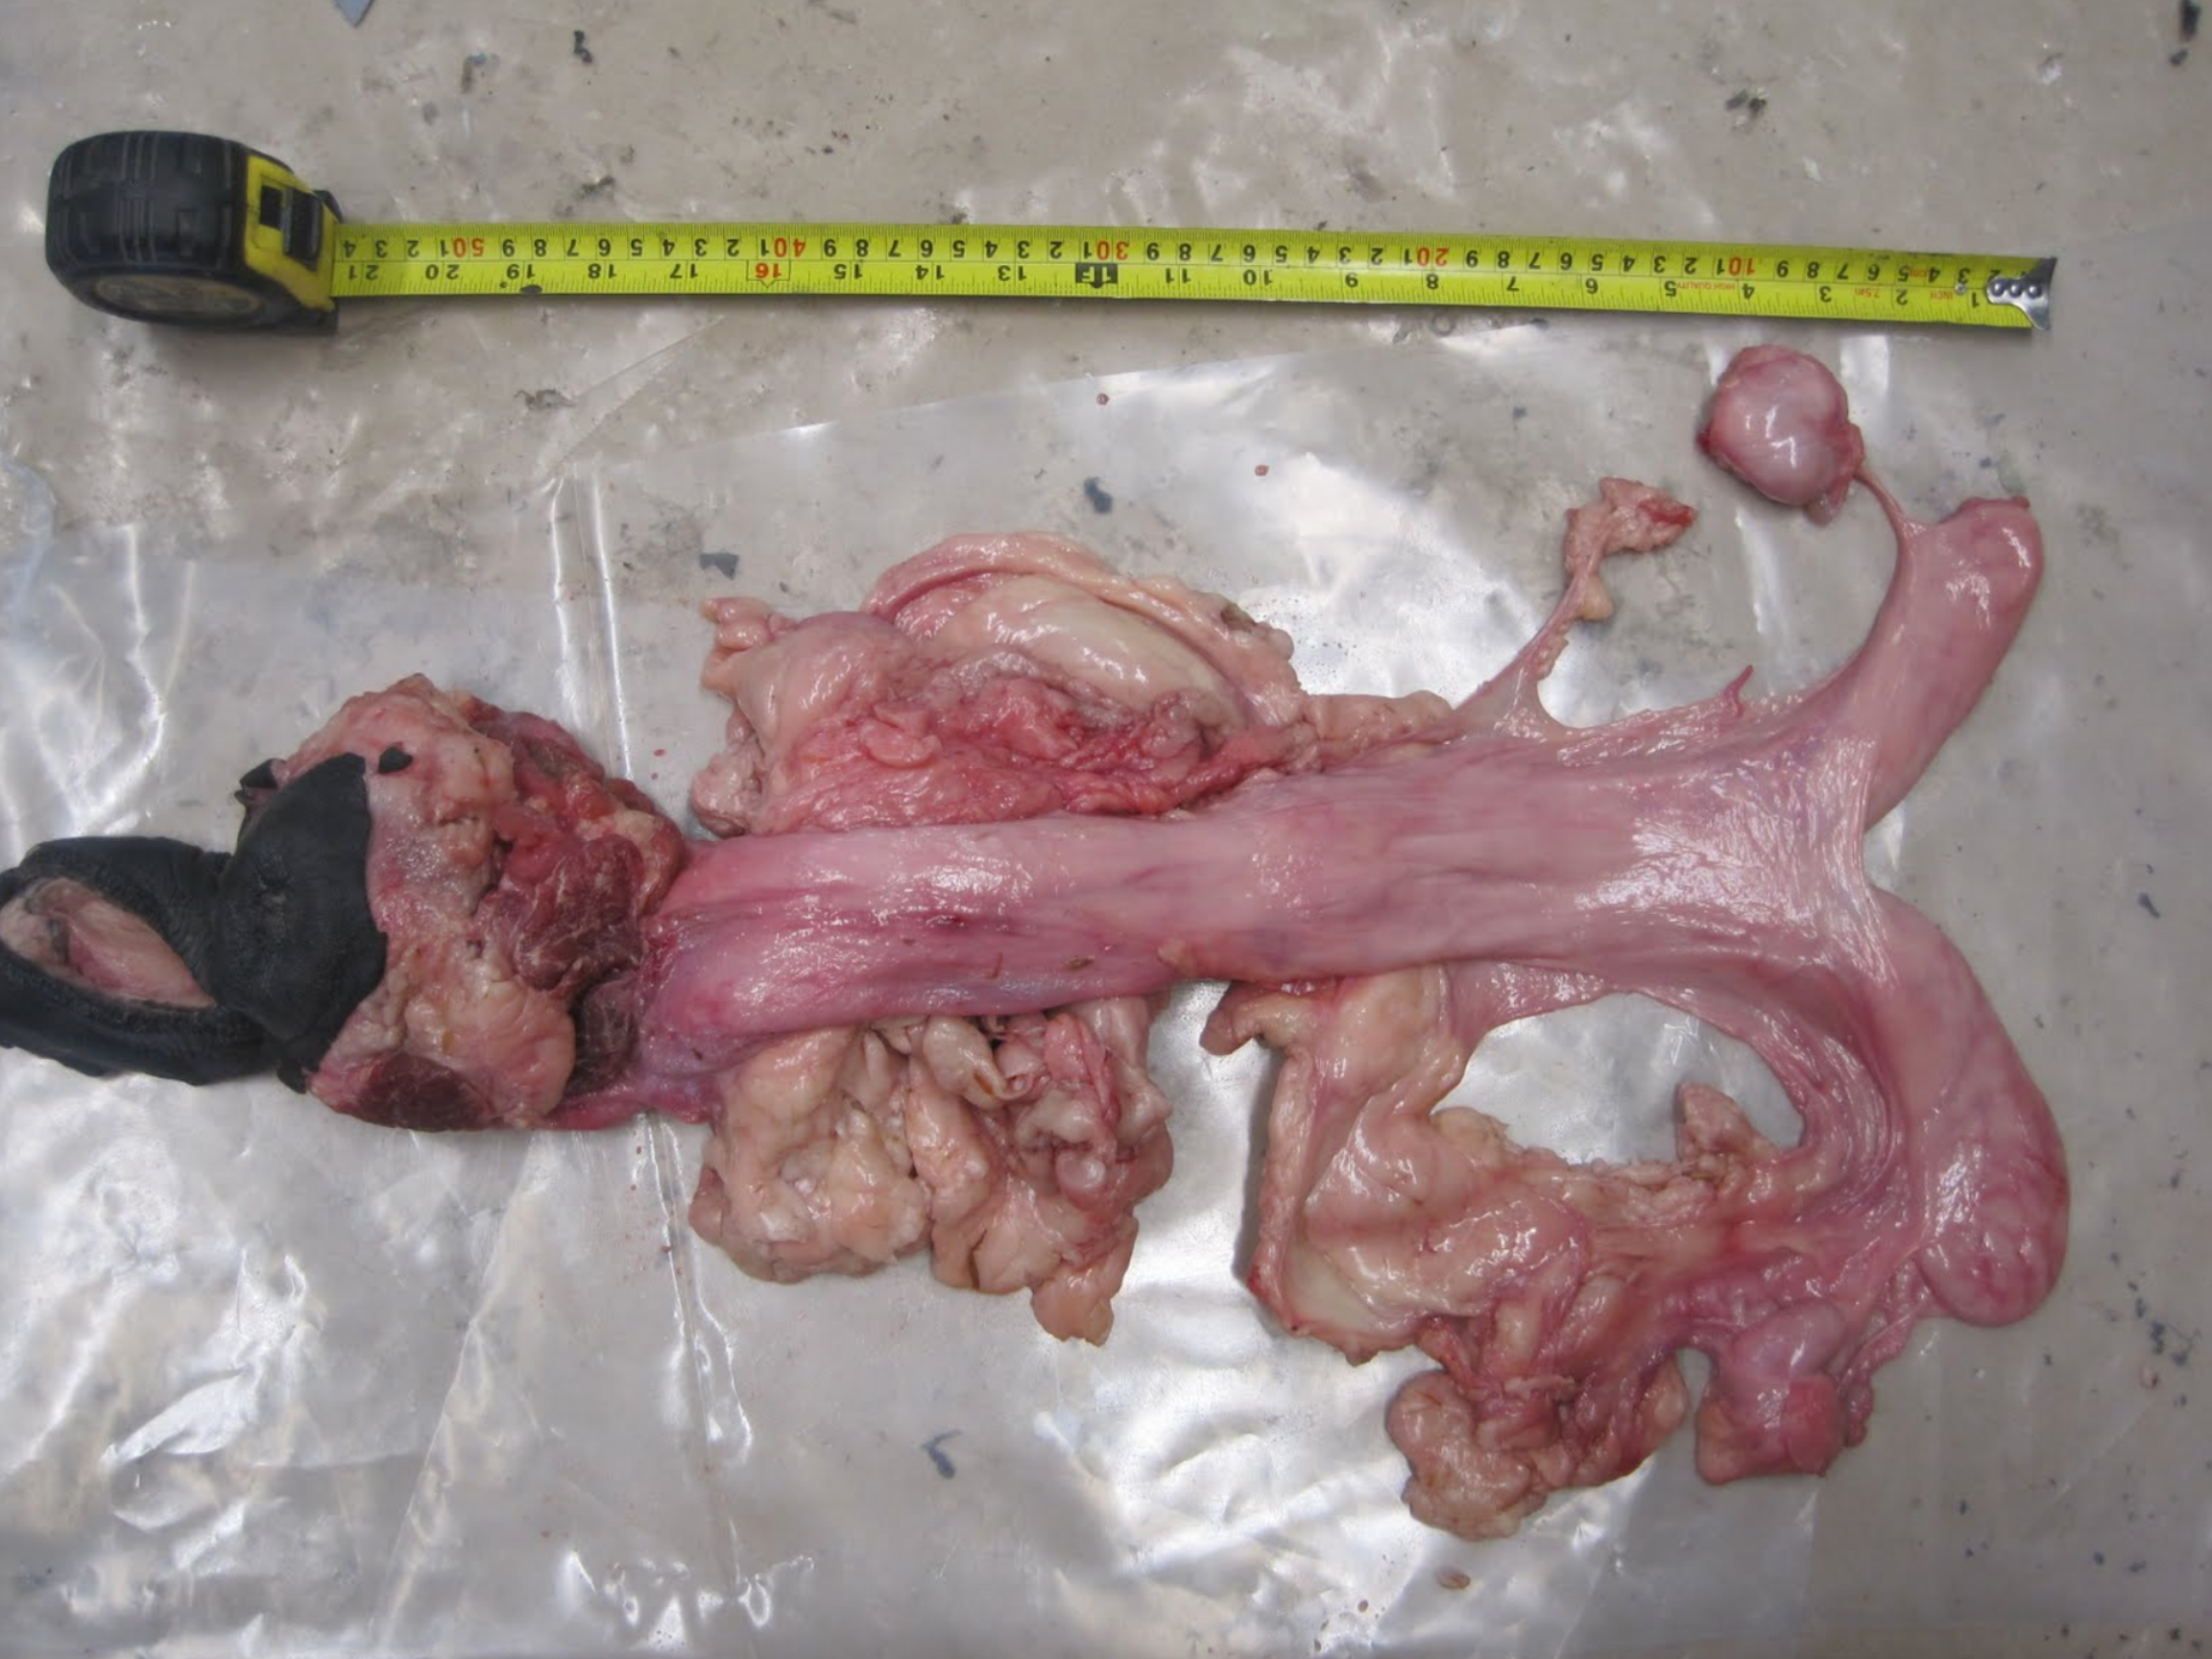  This equine reproductive tract will be the basis for the sculpture we will create in order to reproduce it. The actual structure cannot be effectively molded due to its softness. We will create a sculpture, mold and cast it in a extremely soft mater